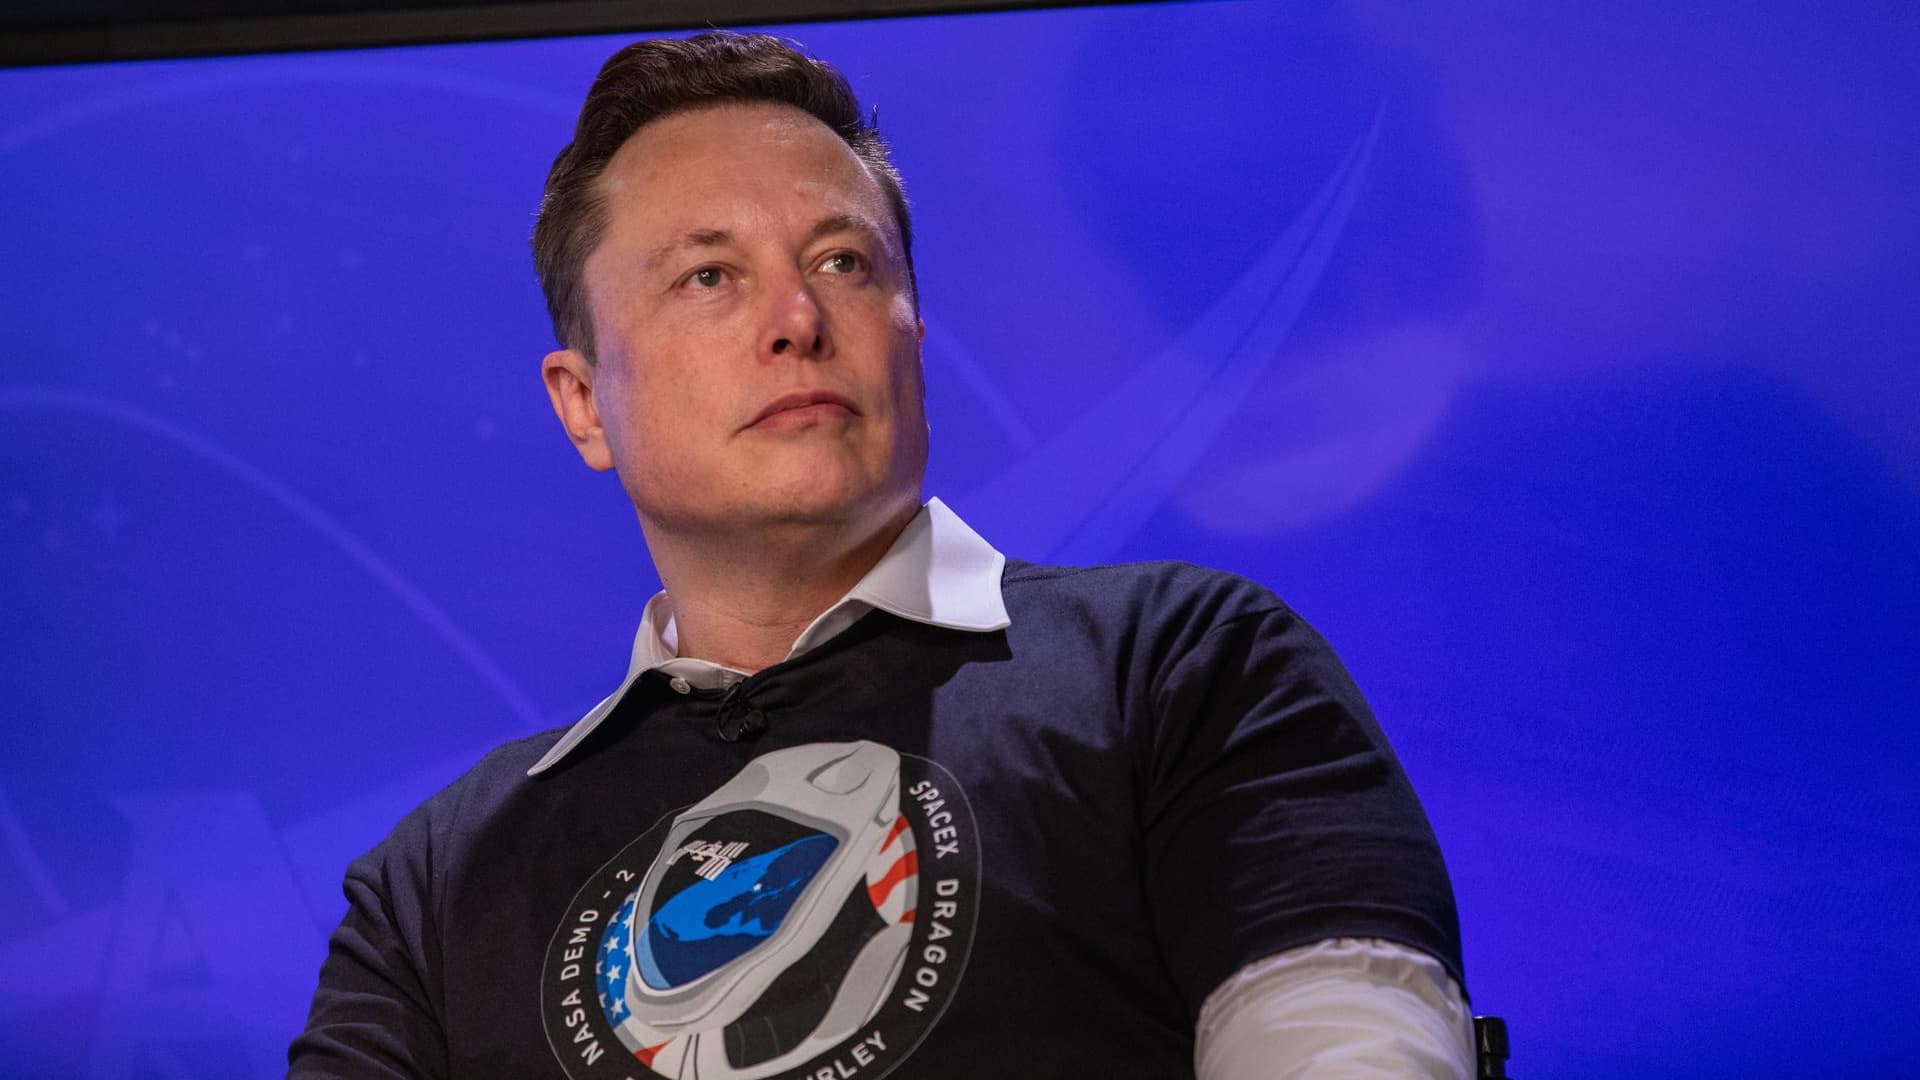 Musk denies ‘wild accusations’ against him in an apparent reference to harassment report